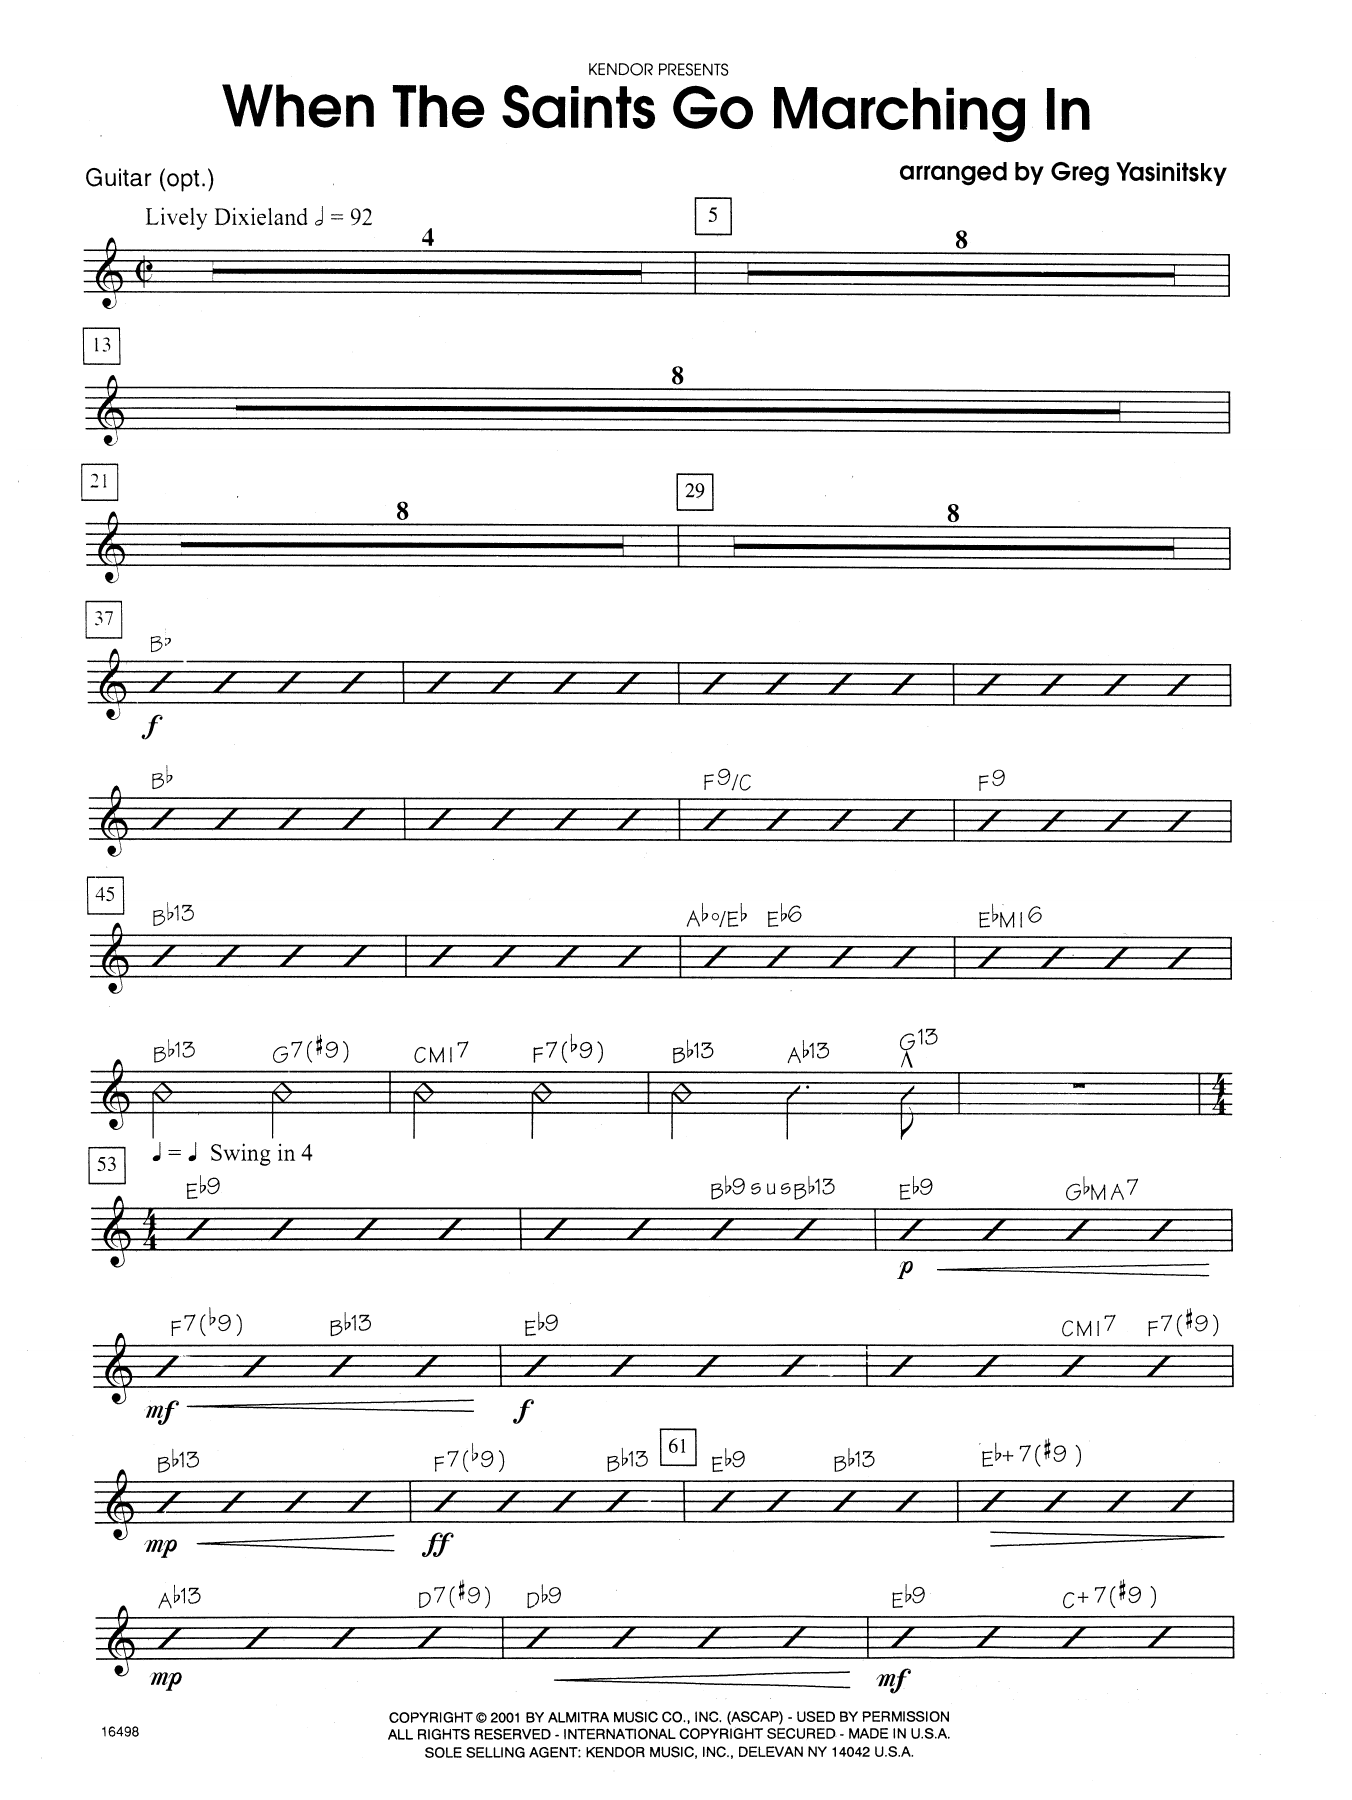 Download Gregory Yasinitsky When the Saints Go Marching In - Guitar Sheet Music